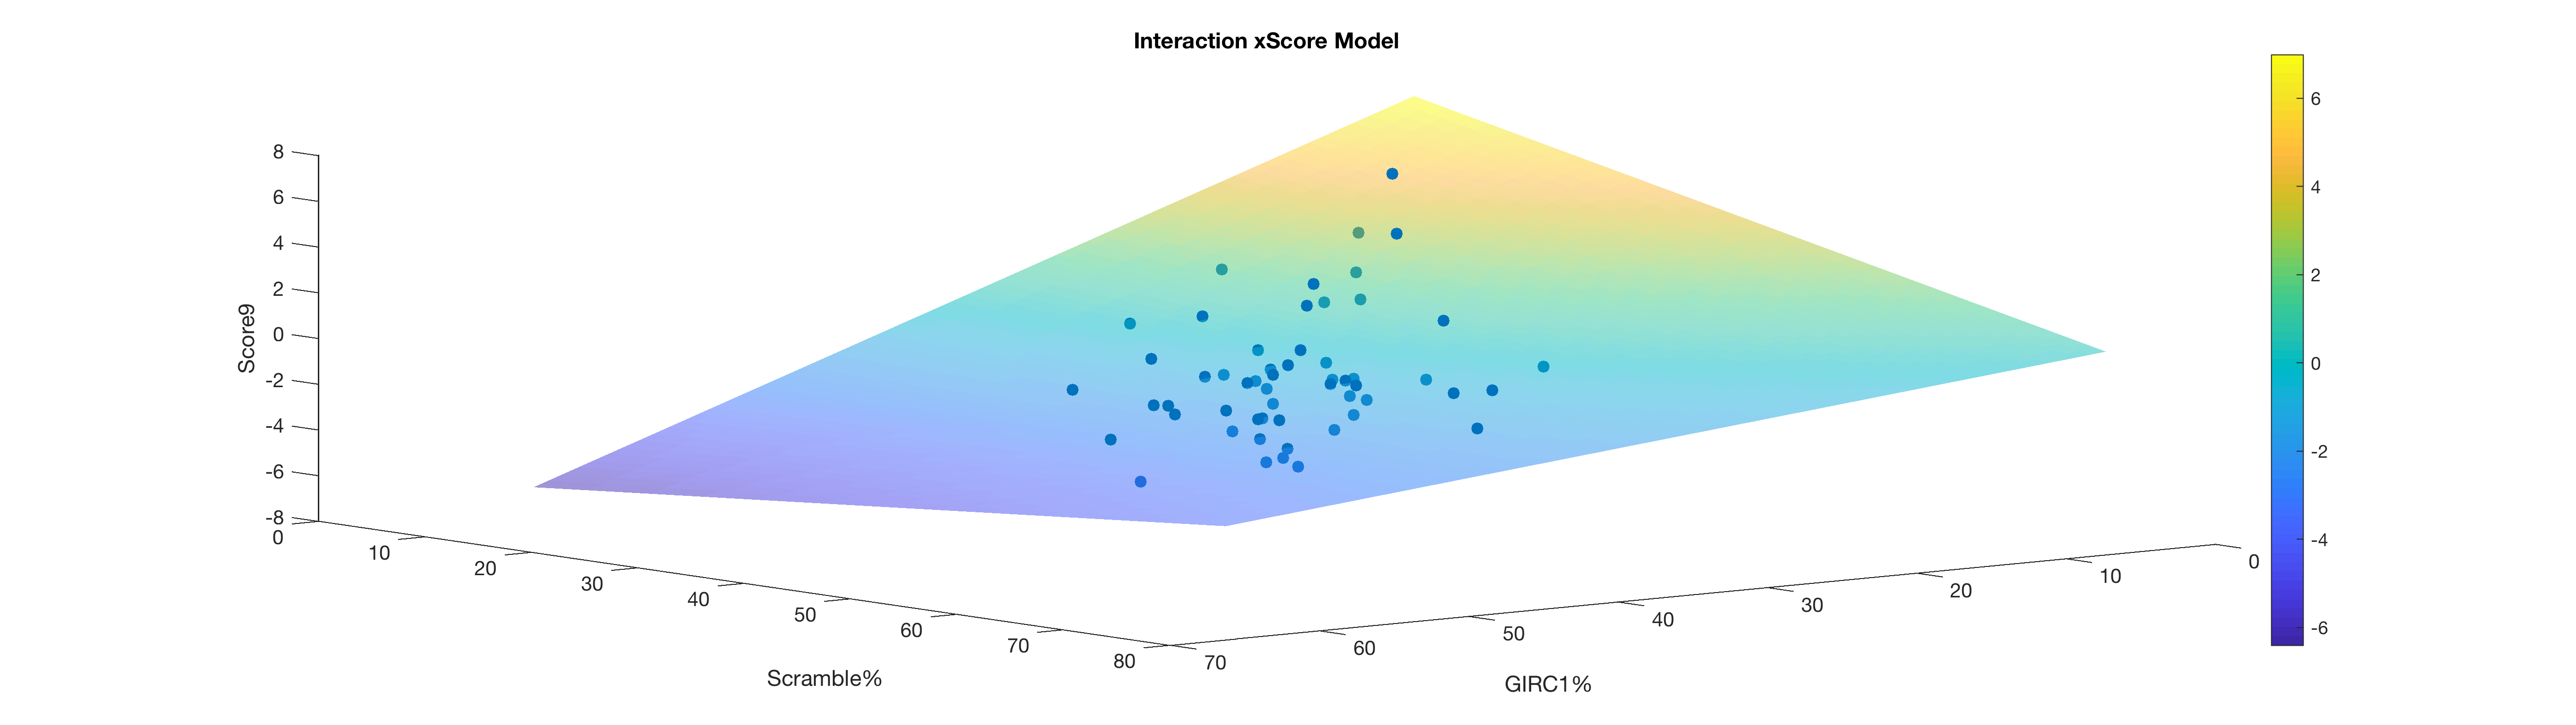 Interaction plot for GIRC1 and Scramble Rate